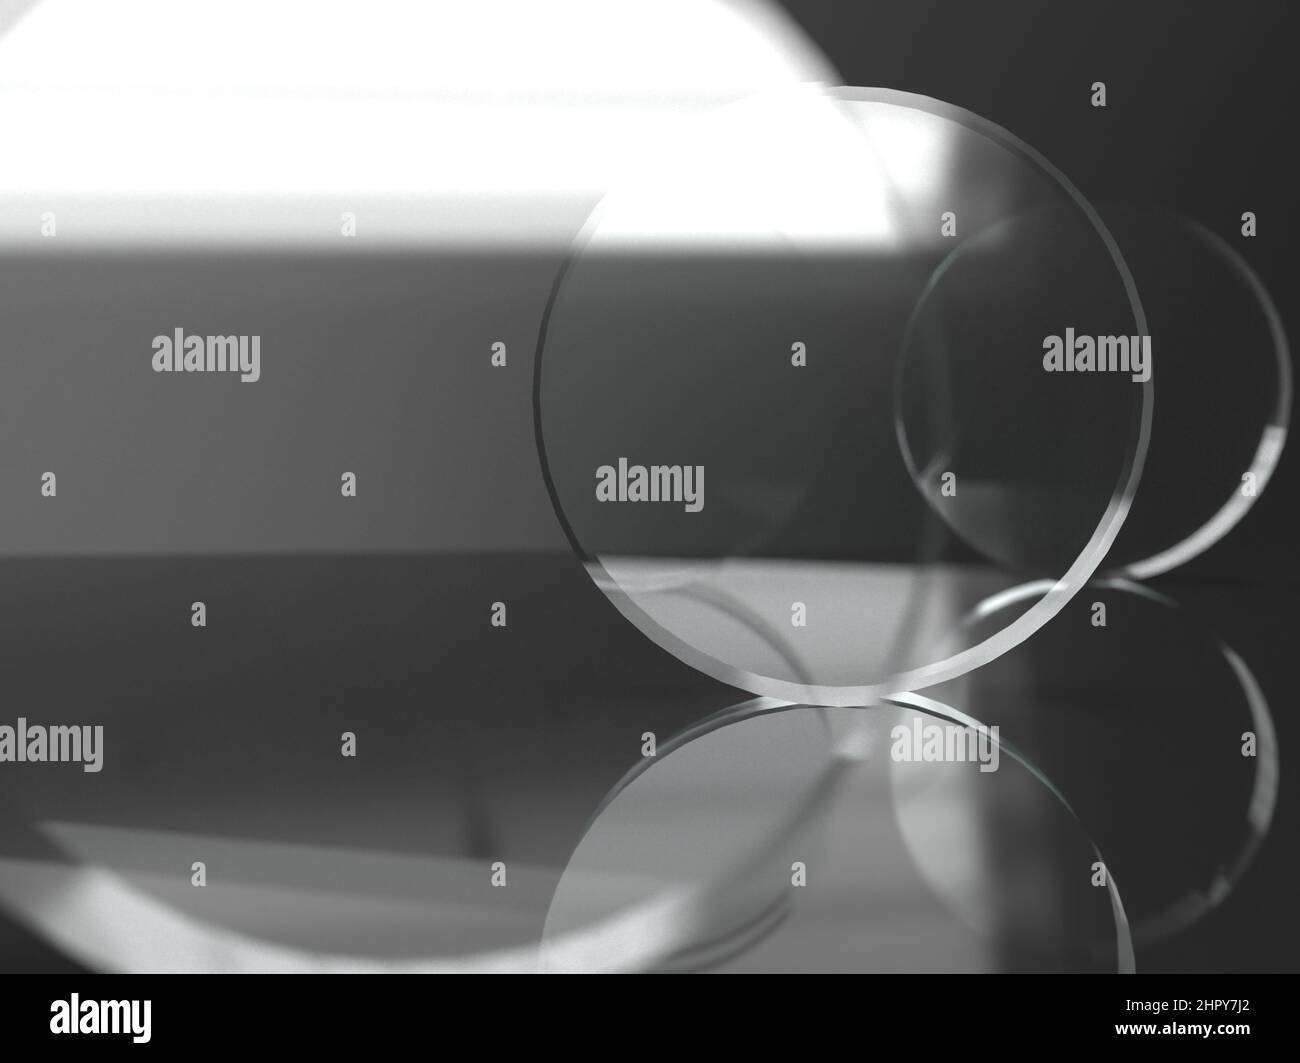 three glass lenses on a reflective surface before black background with focus on second lens. 3D rendering. Stock Photo